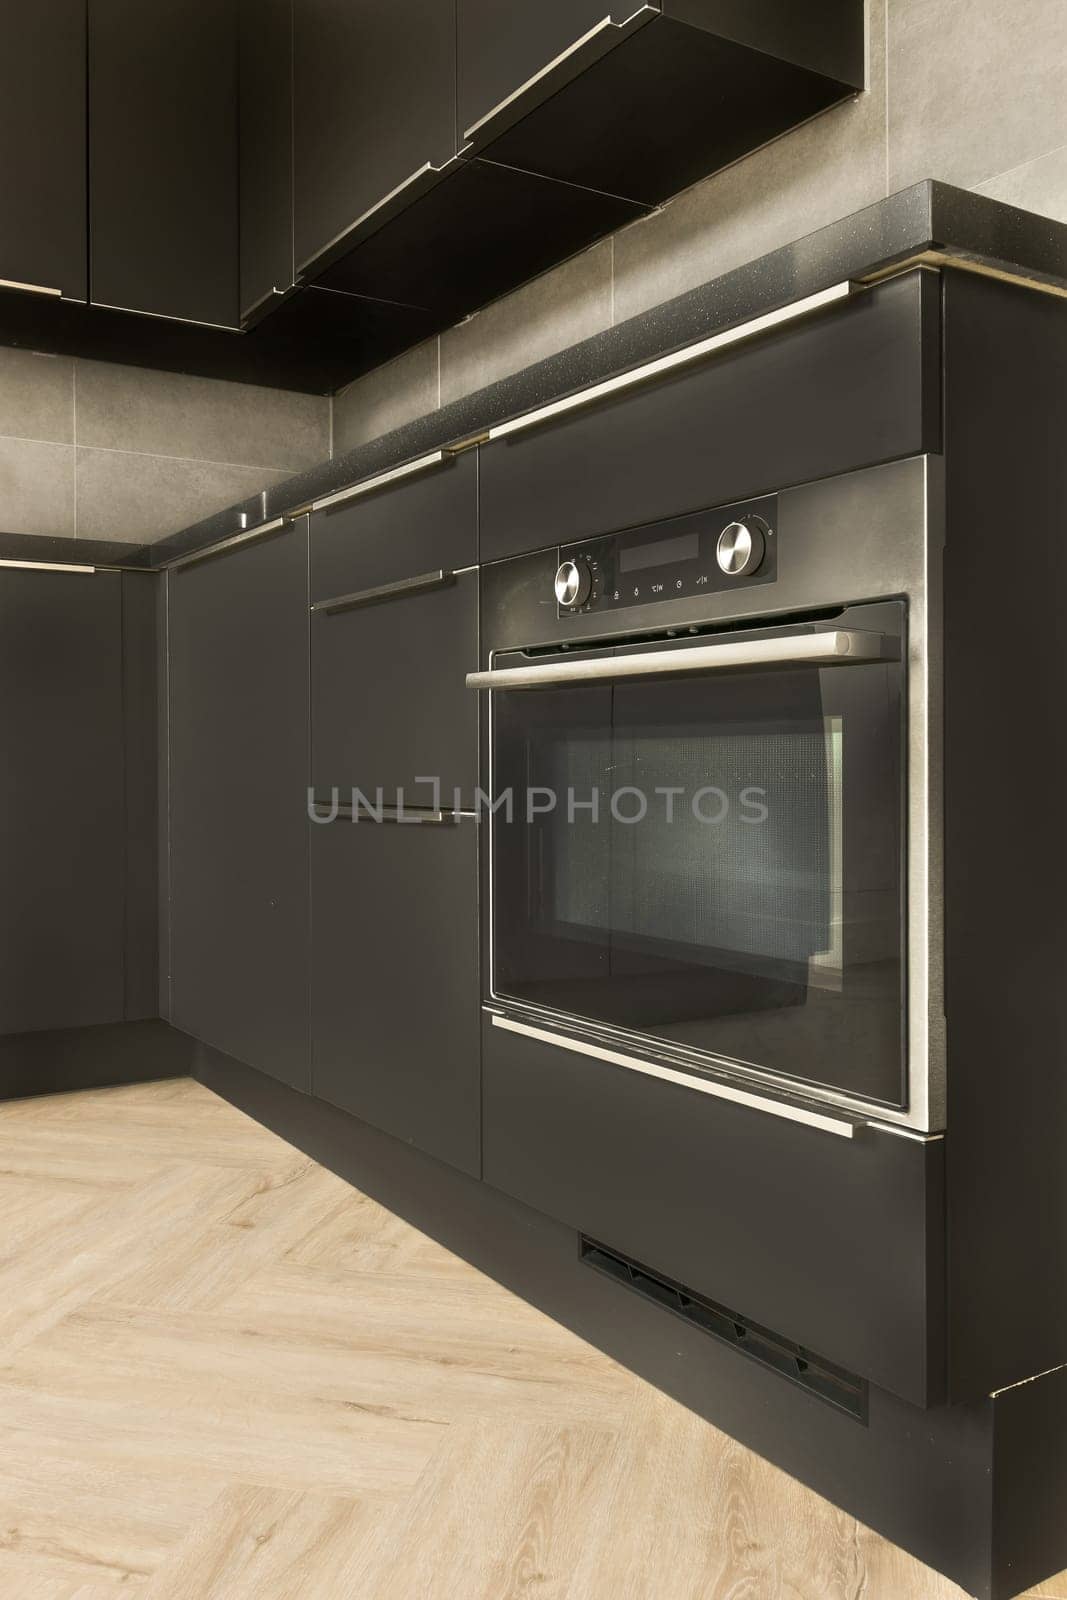 a modern kitchen with wood flooring and an oven on the wall in the center of the space is empty